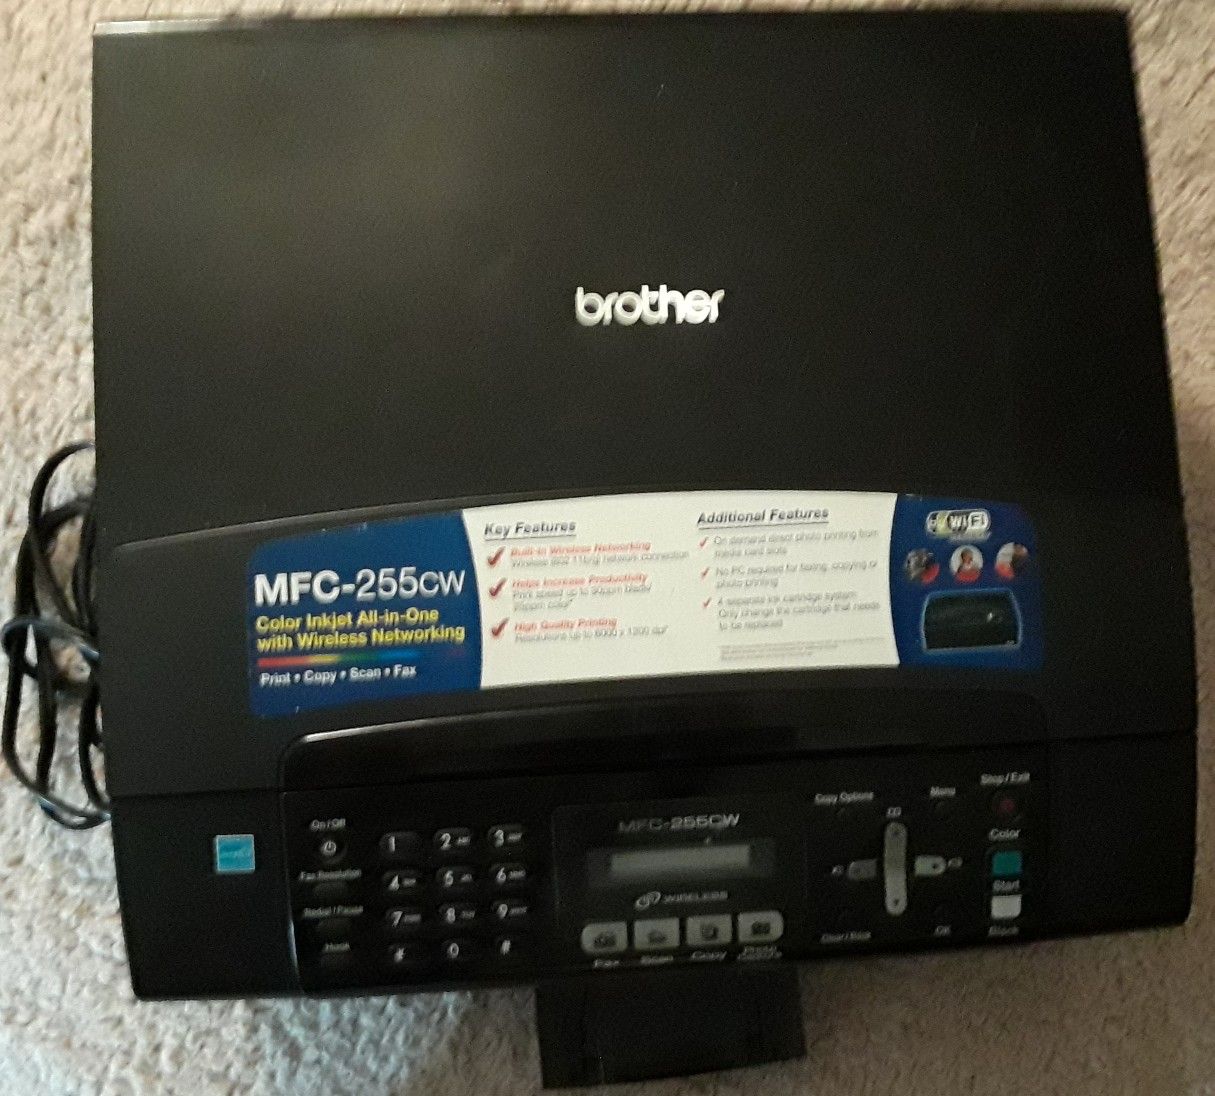 Brother MFC-255cw All-in-One Inkjet Printer